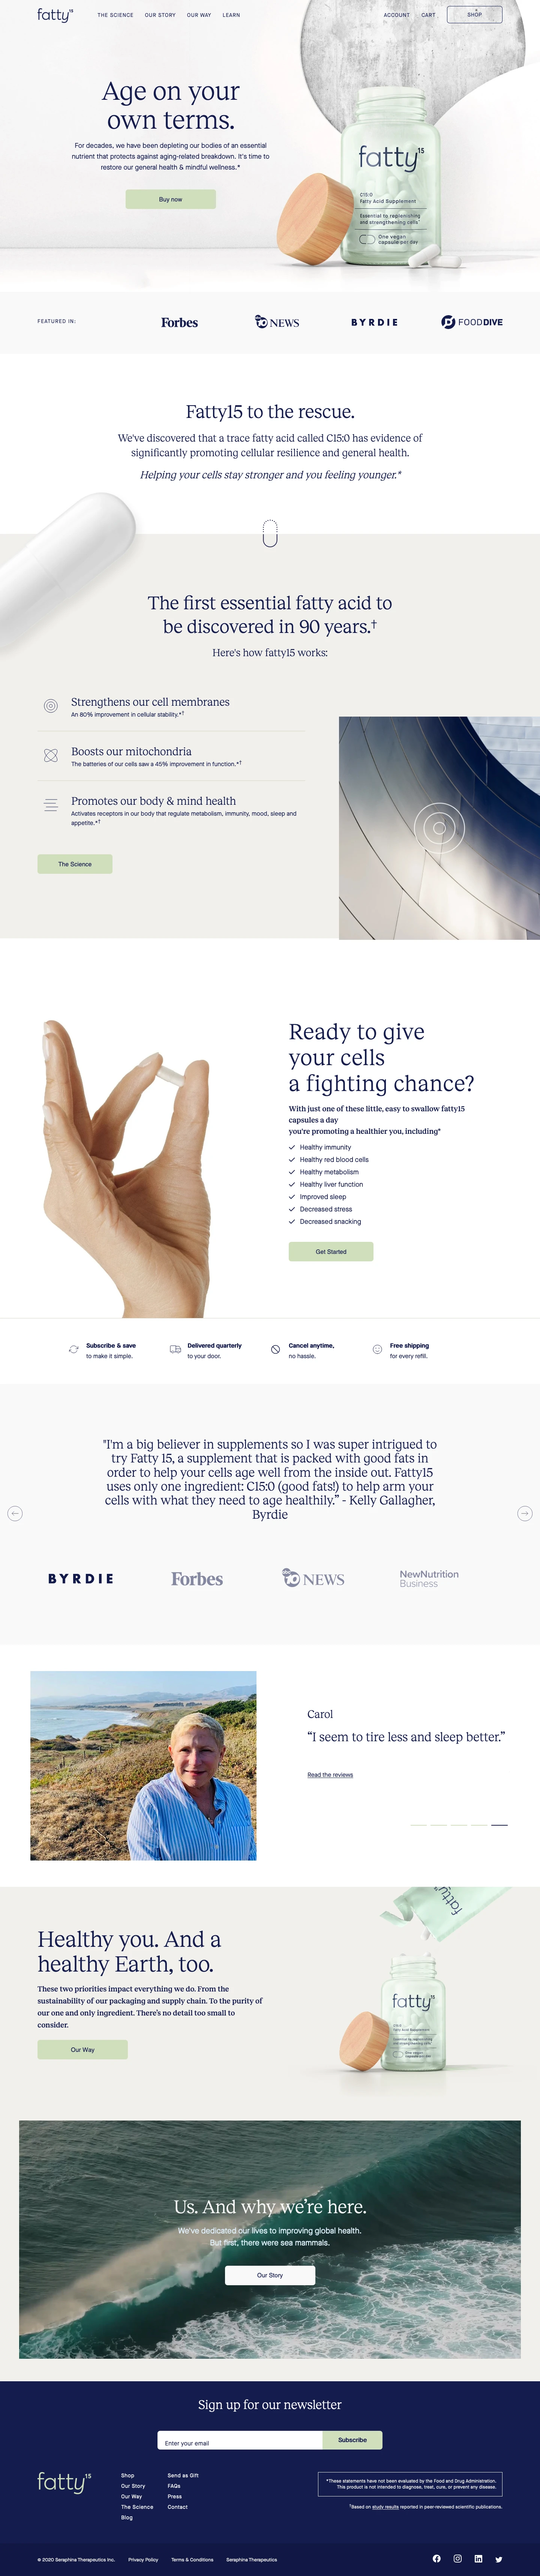 fatty15 Landing Page Example: Age on your own terms. For decades, we have been depleting our bodies of an essential nutrient that protects against aging-related breakdown. It's time to restore our general health & mindful wellness.